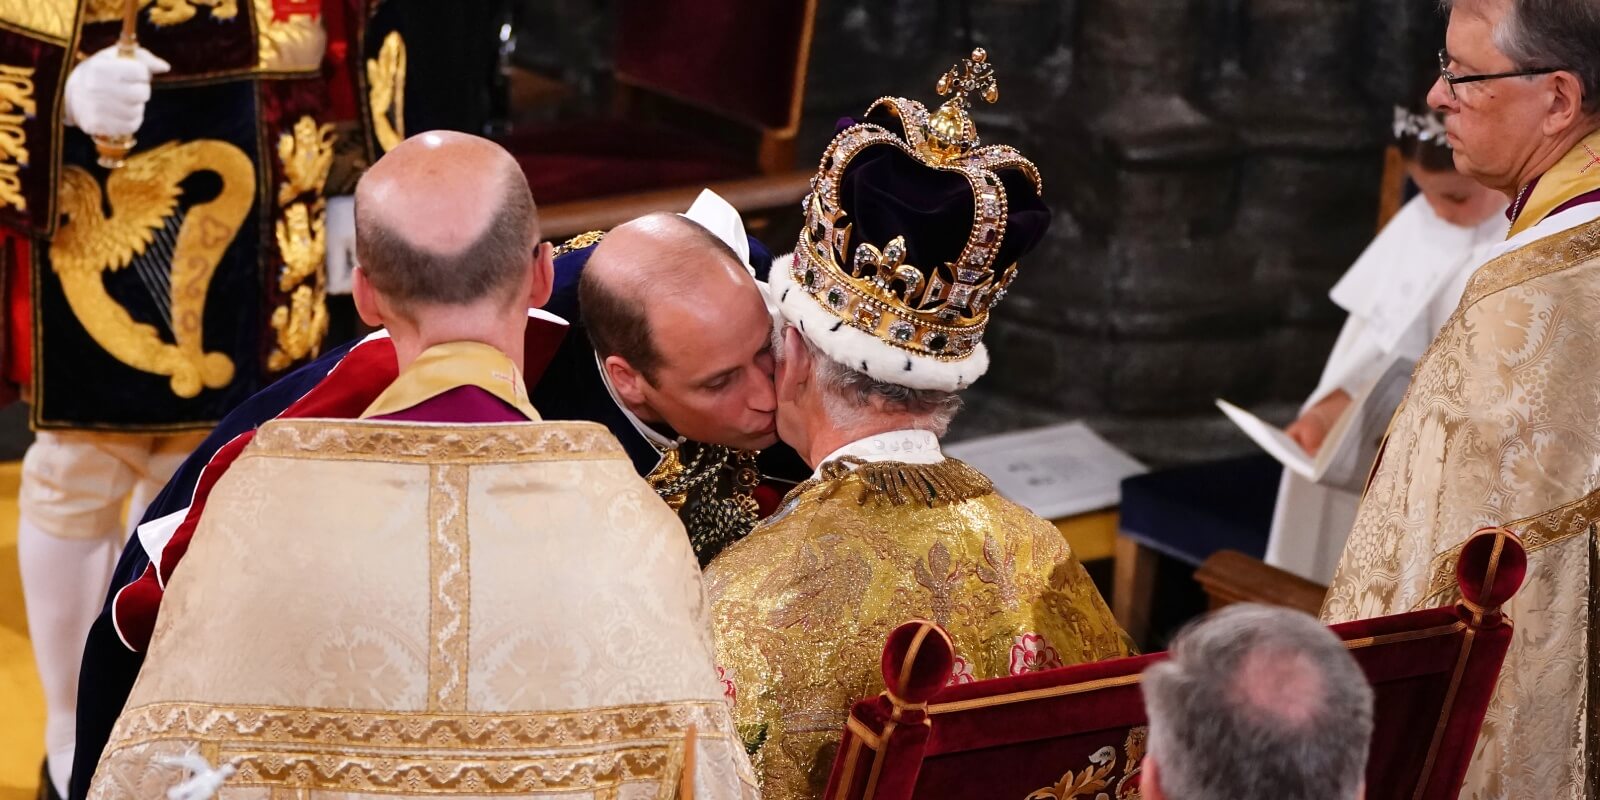 Prince William kisses King Charles on the cheek after coronation pledge.